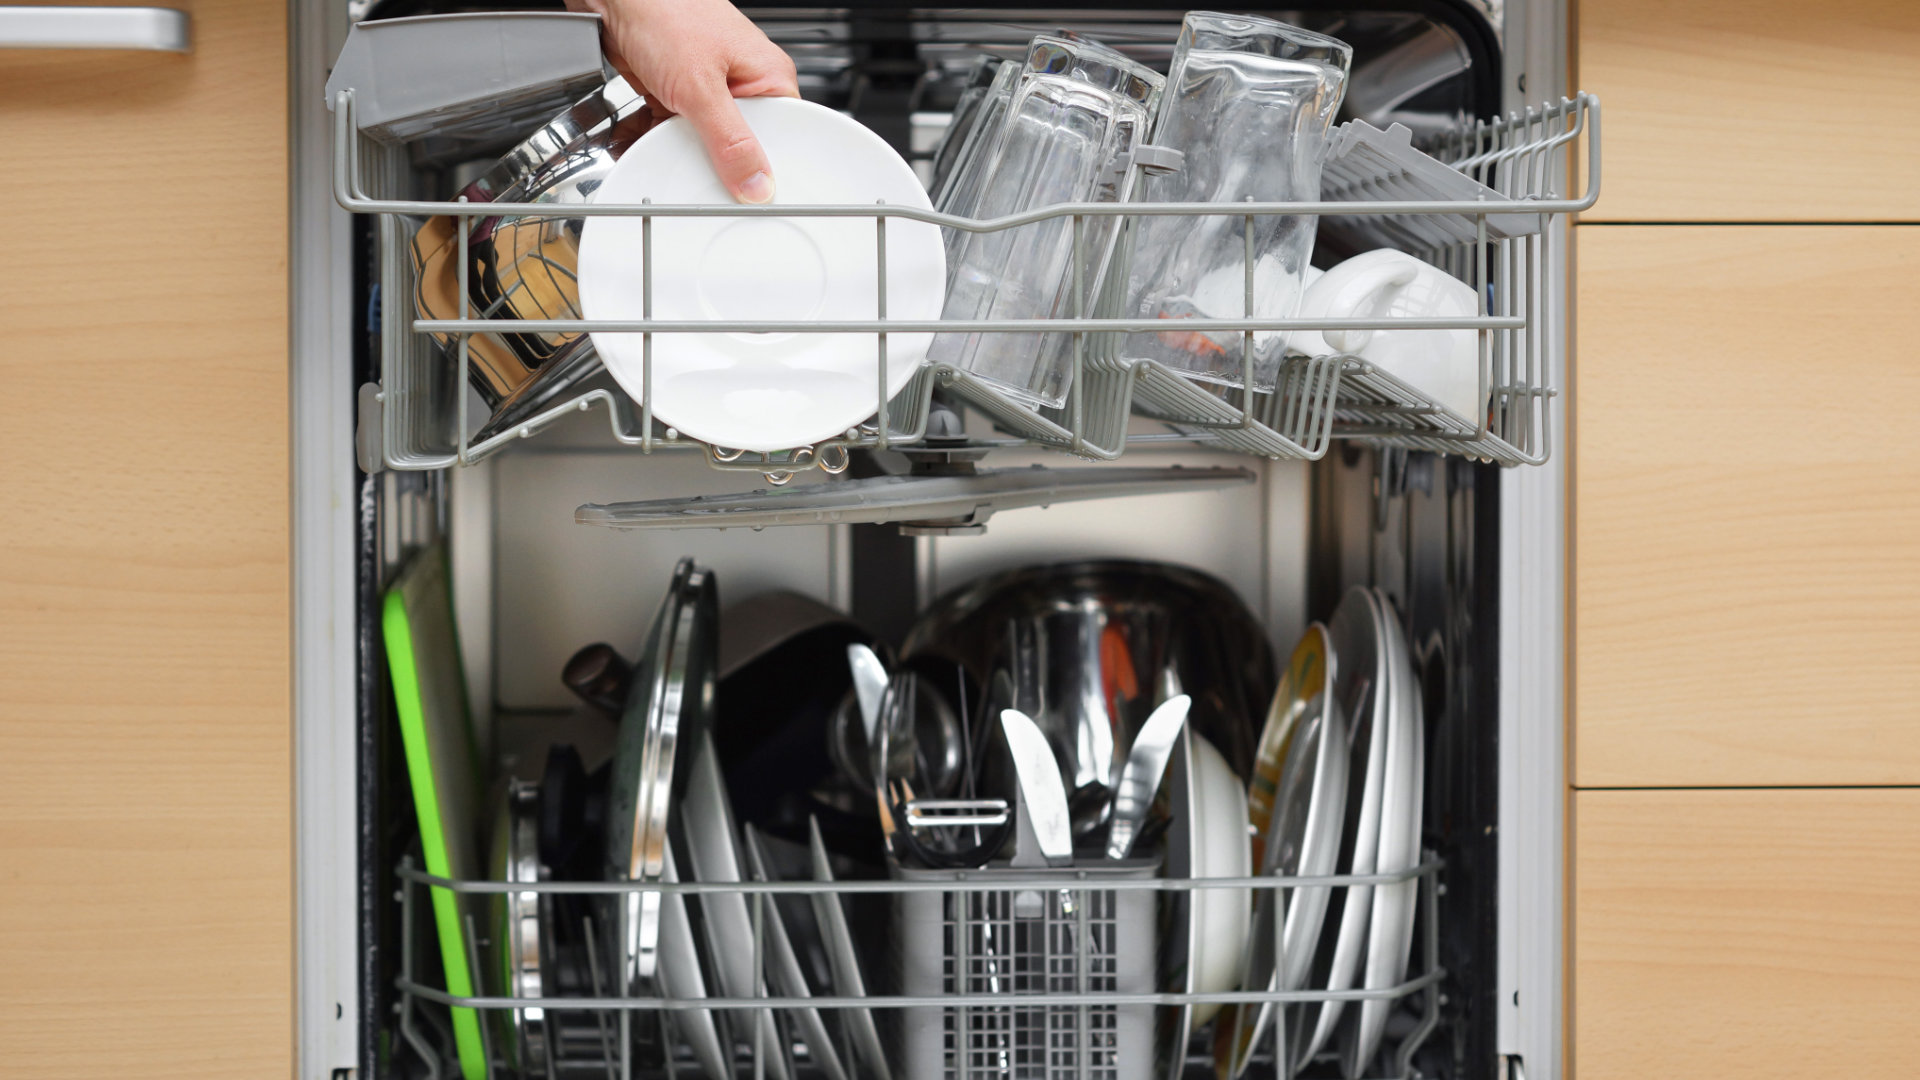 Featured image for “LG Dishwasher Error Codes: What Do They Mean?”